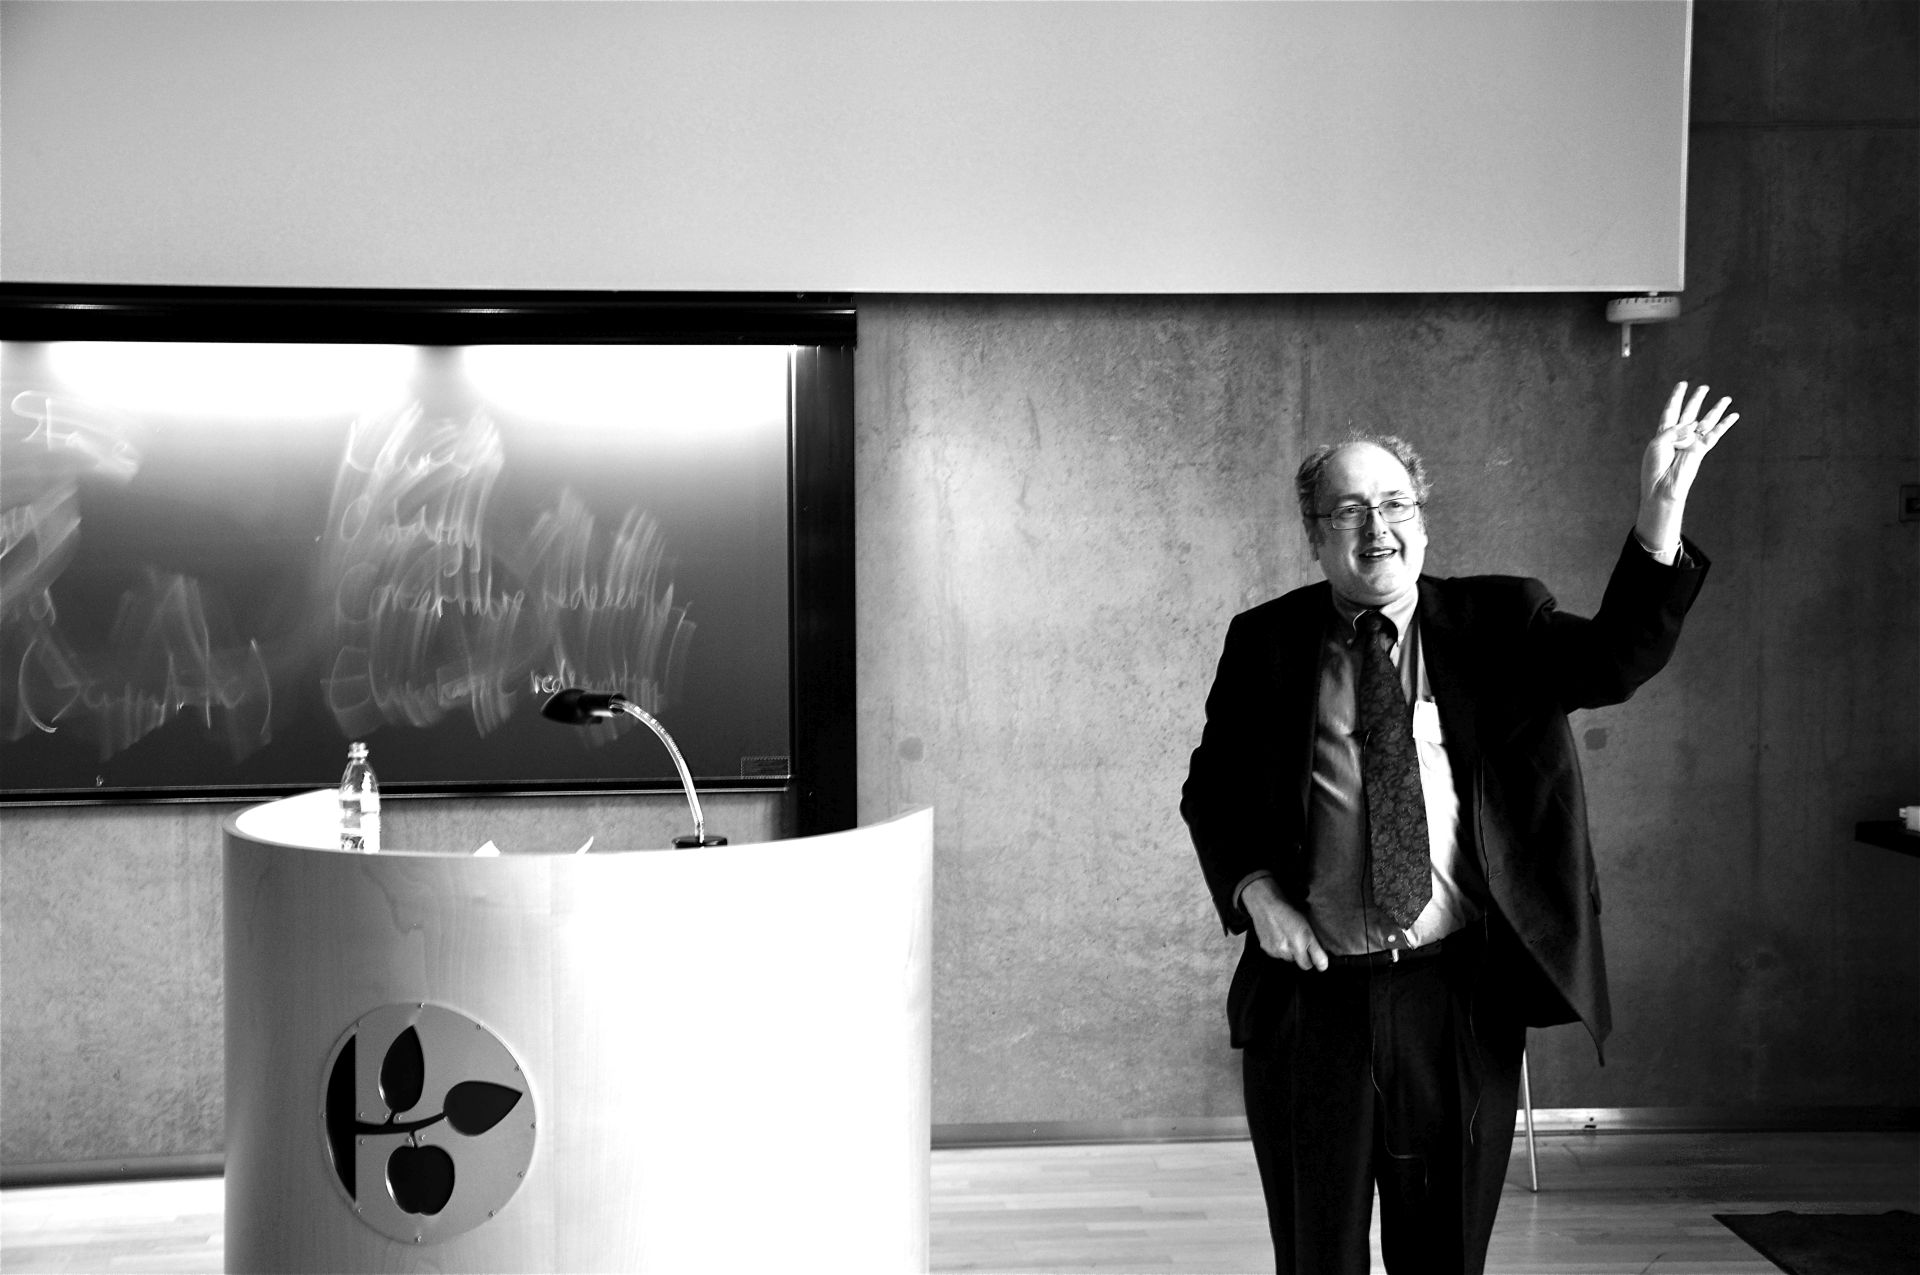 Brian Leiter presenting at the Danish Philosophical Association, Odense, March 2013